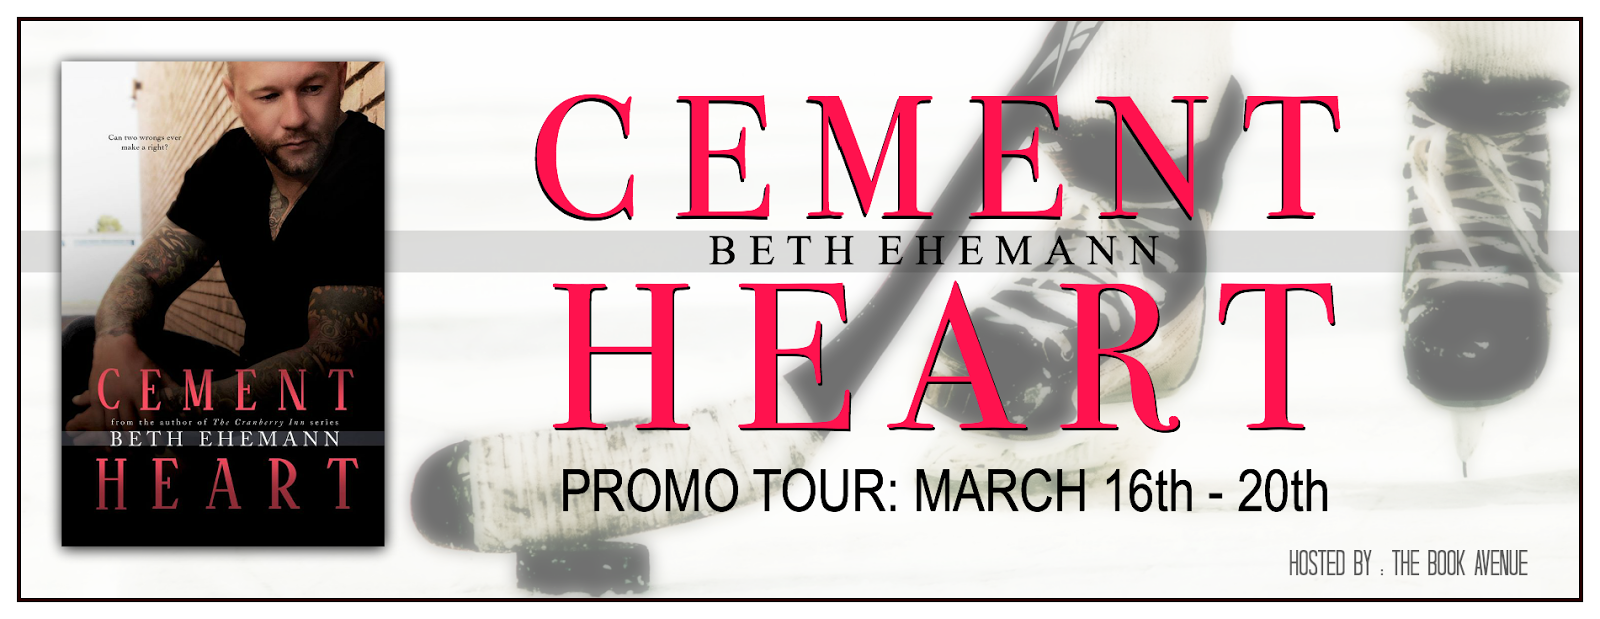 Cement Heart is LIVE! Read the Excerpt, My Review and Enter the